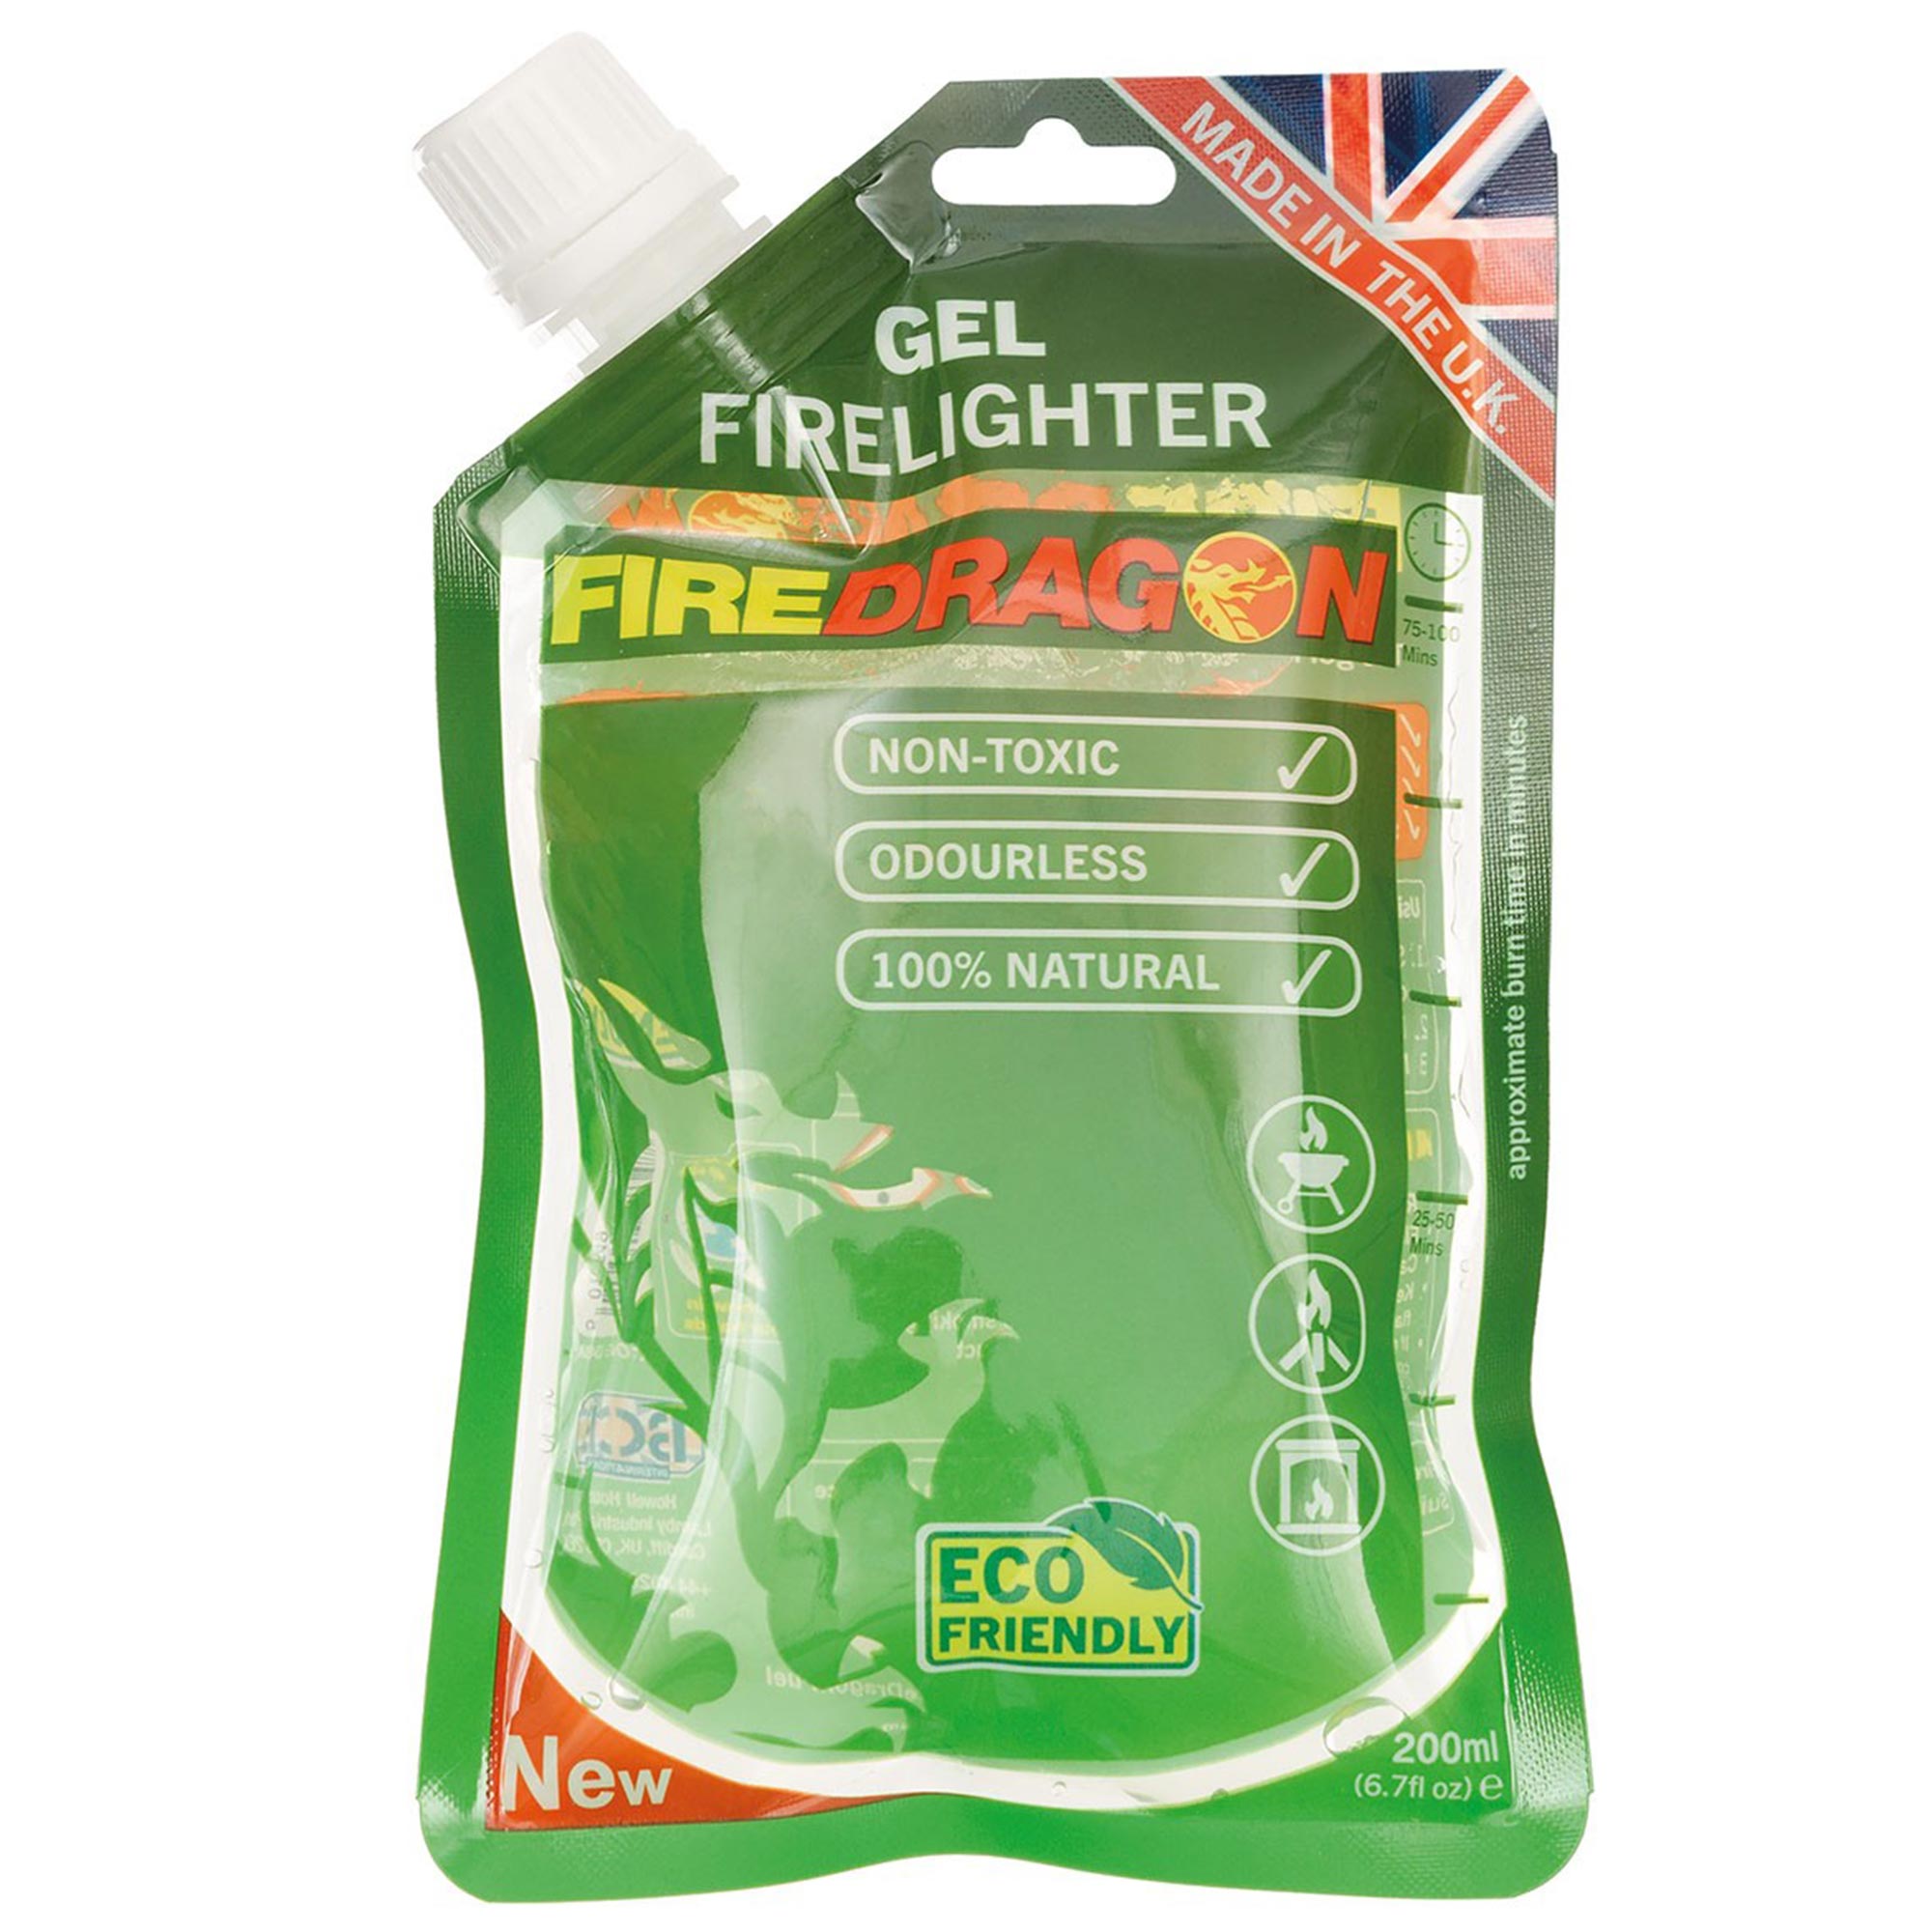 Fire Dragon Fuel x12 British Army Fire Lighter Camping Fuel All Weather Matches